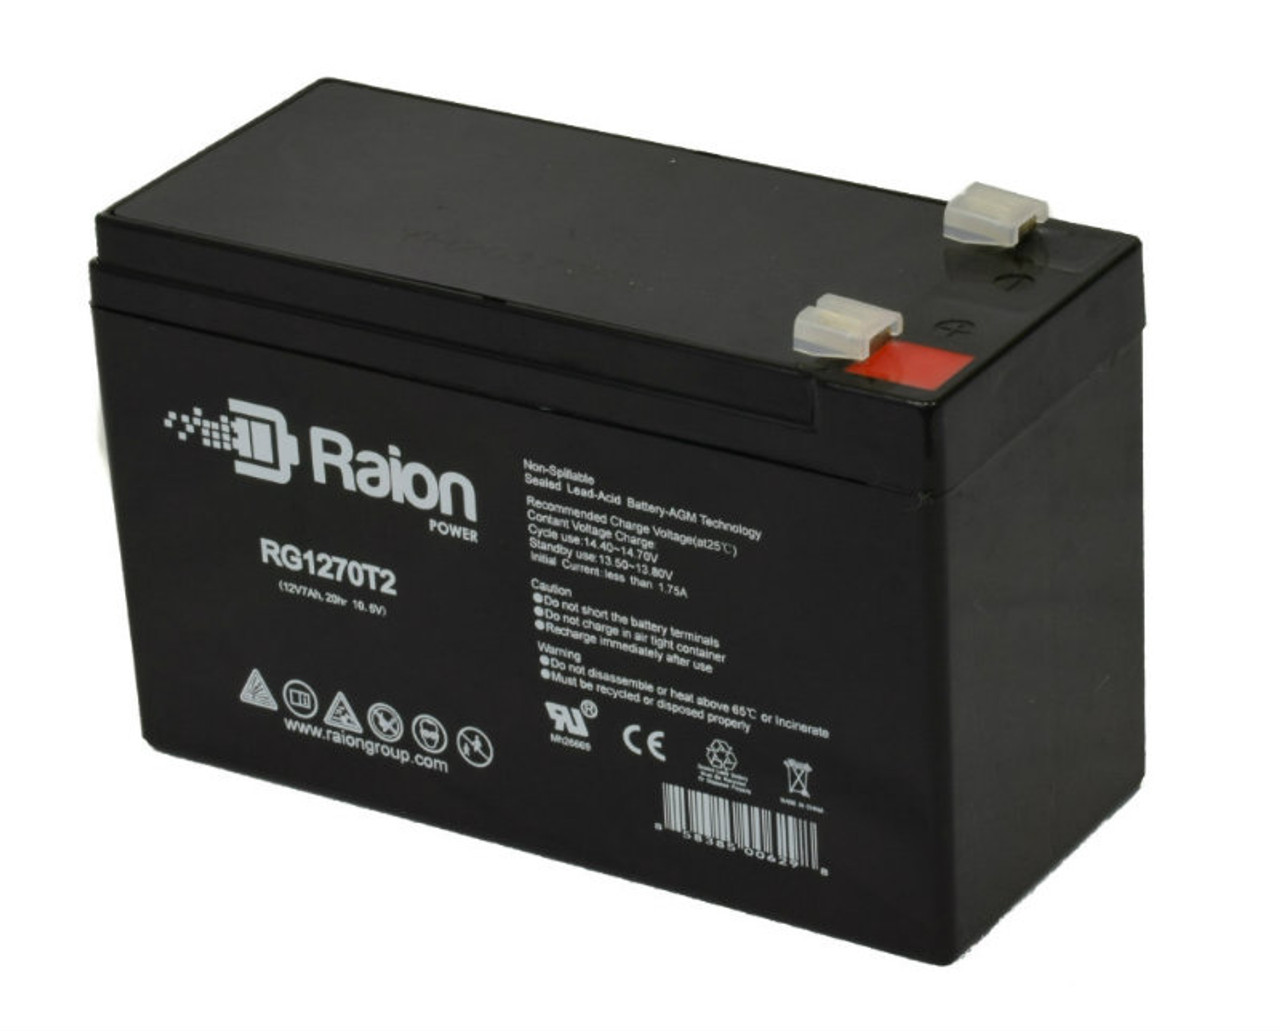 Raion Power Replacement 12V 7Ah RG1270T1 Fire Alarm Battery for GE Security Alarm Caddx/NetworX NX-4